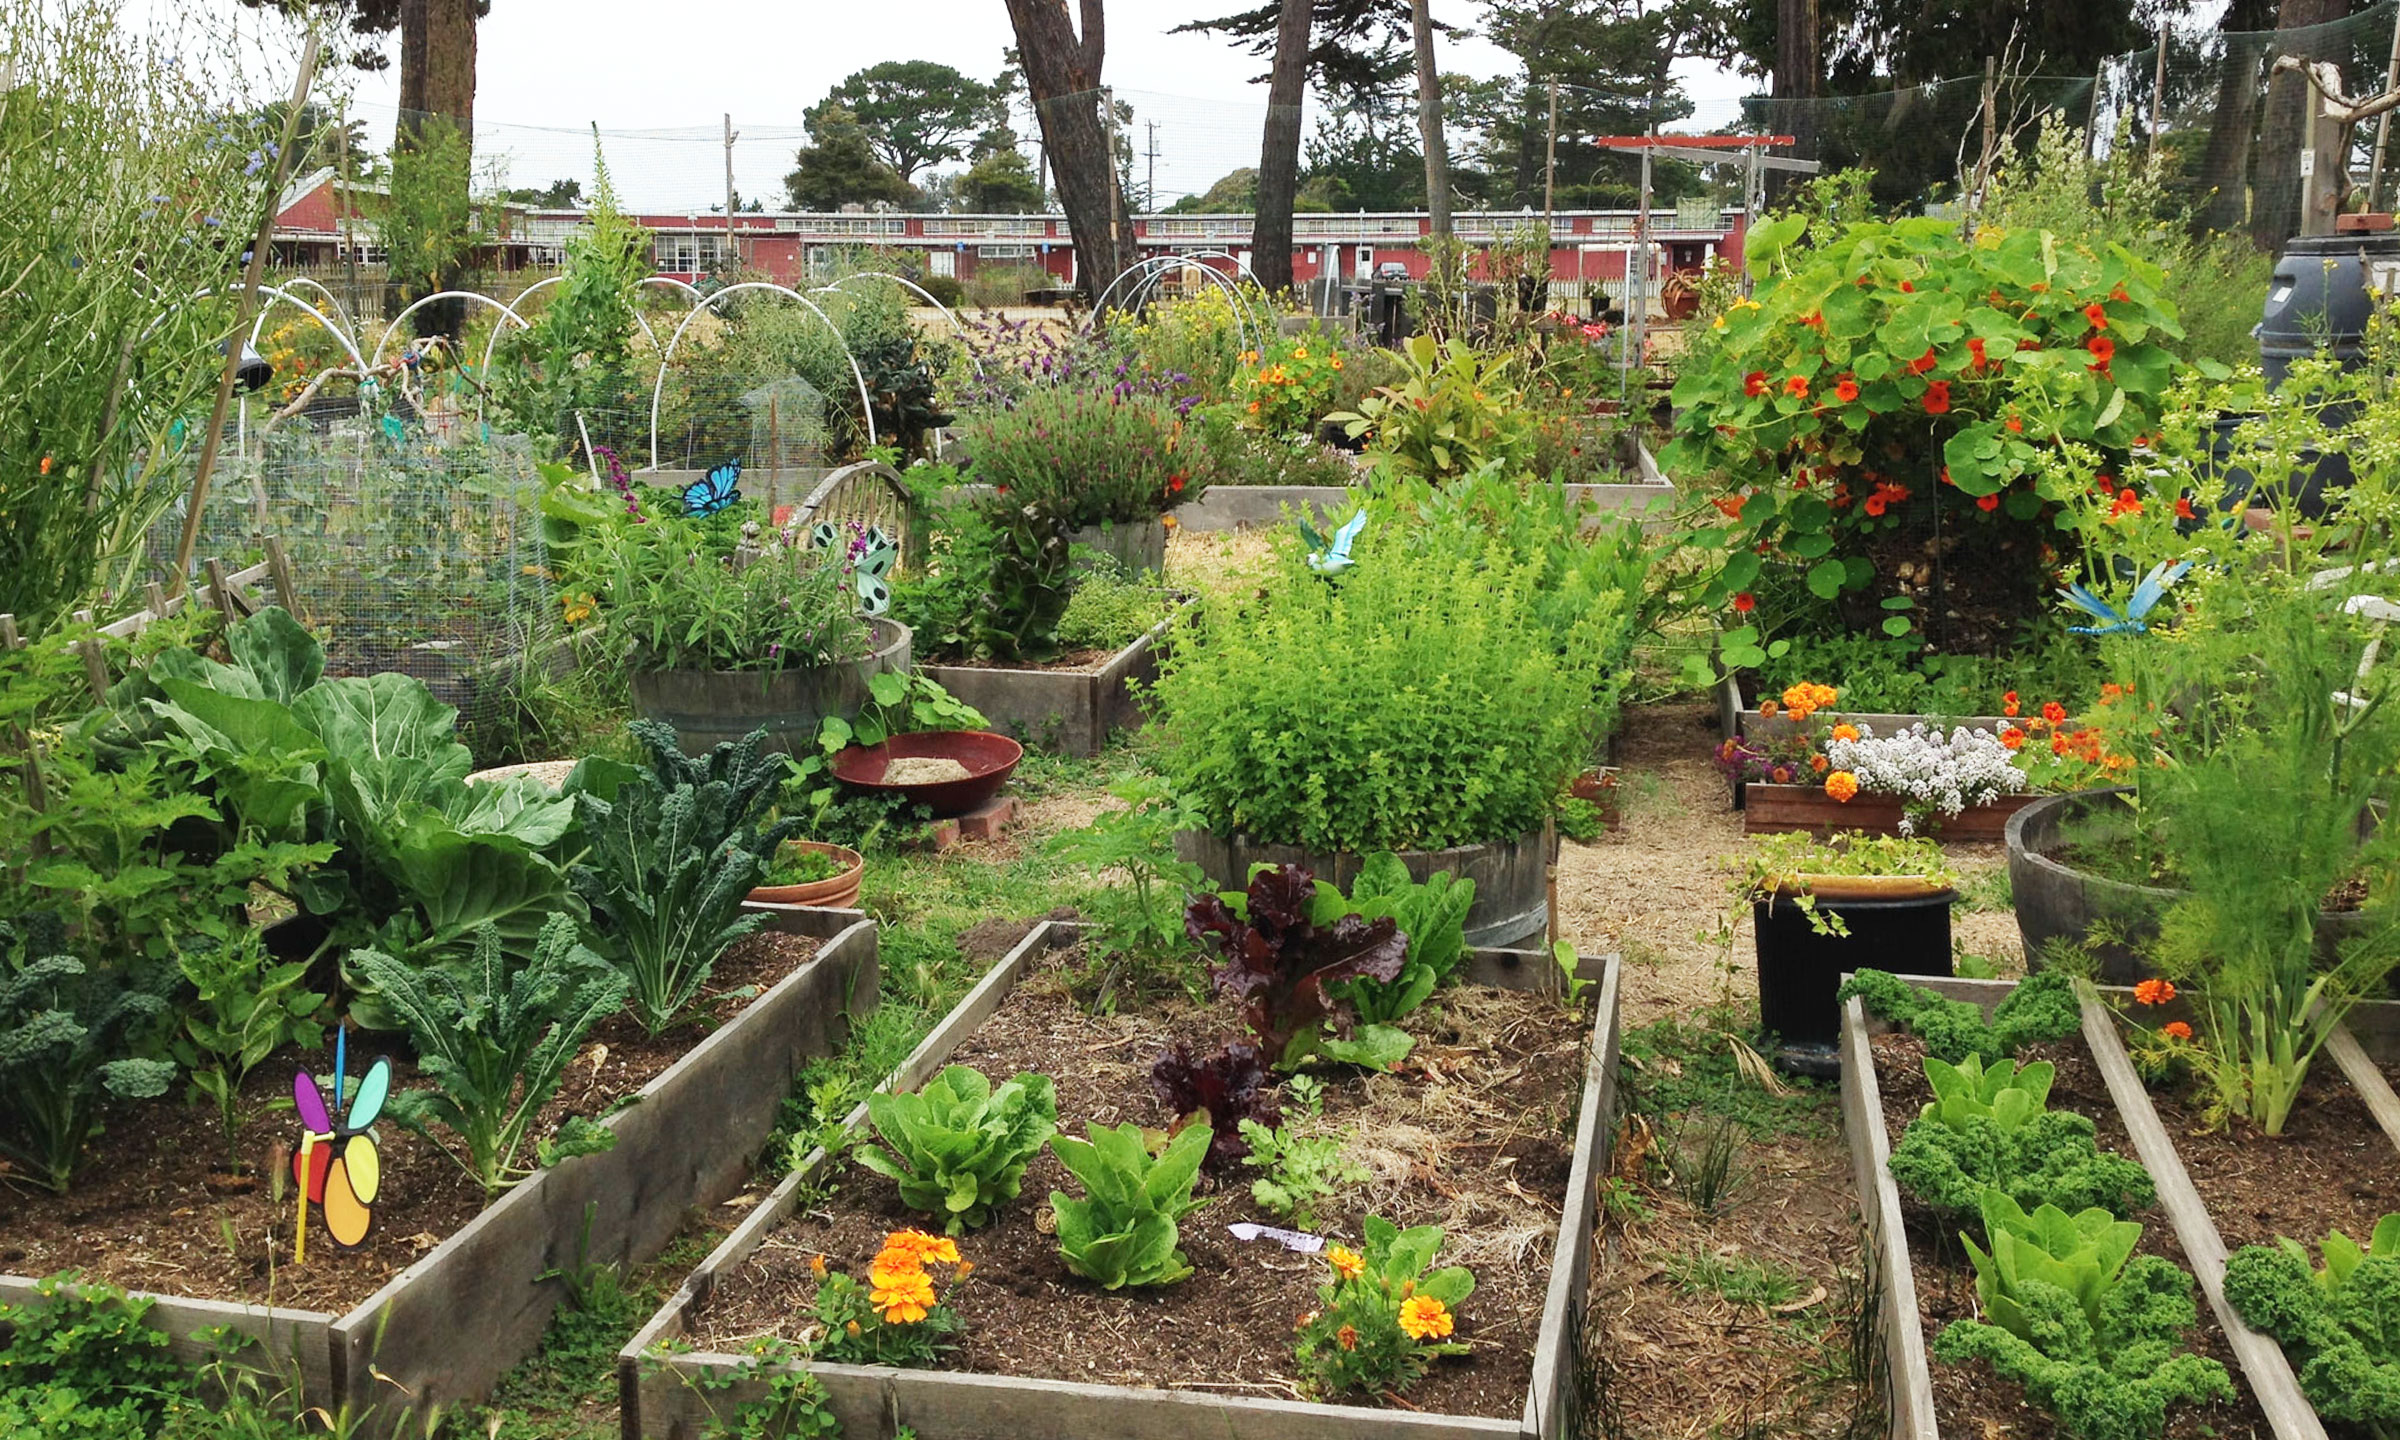 Raised garden beds in a community garden filled with plants.